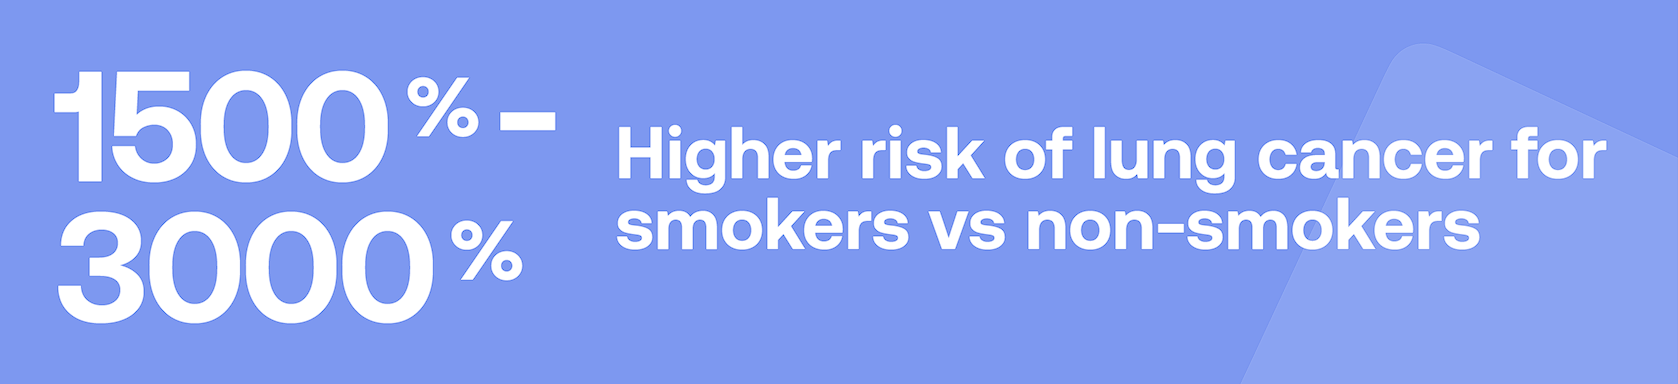 1500%-3000% Higher risk of lung cancer for smokers vs non-smokers